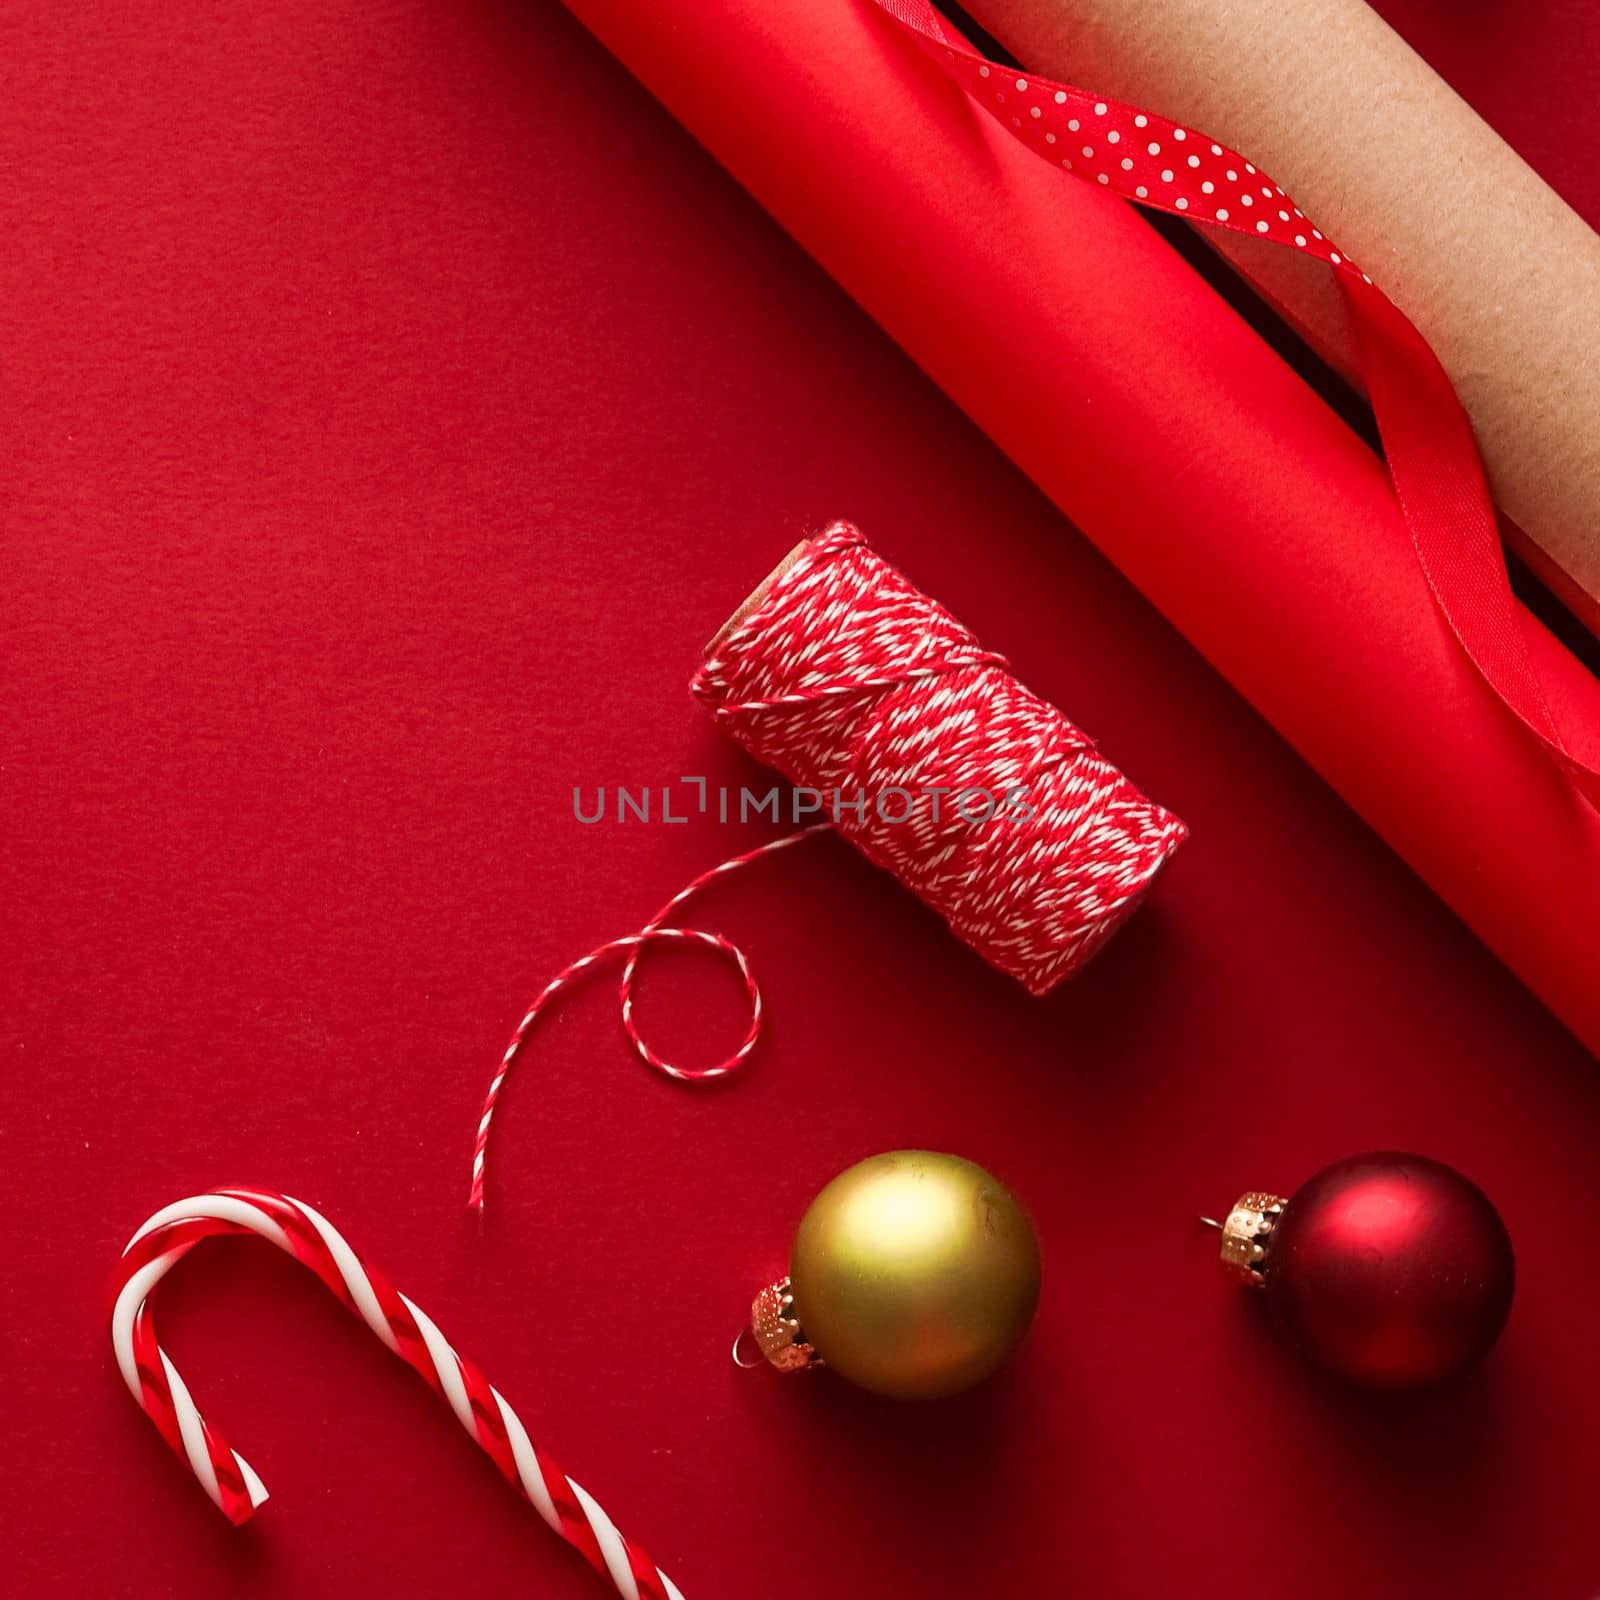 Christmas preparation, boxing day and holidays gift giving, xmas craft paper and ribbons for gifts boxes on red background as wrapping tools and decorations, diy presents as holiday flat lay design